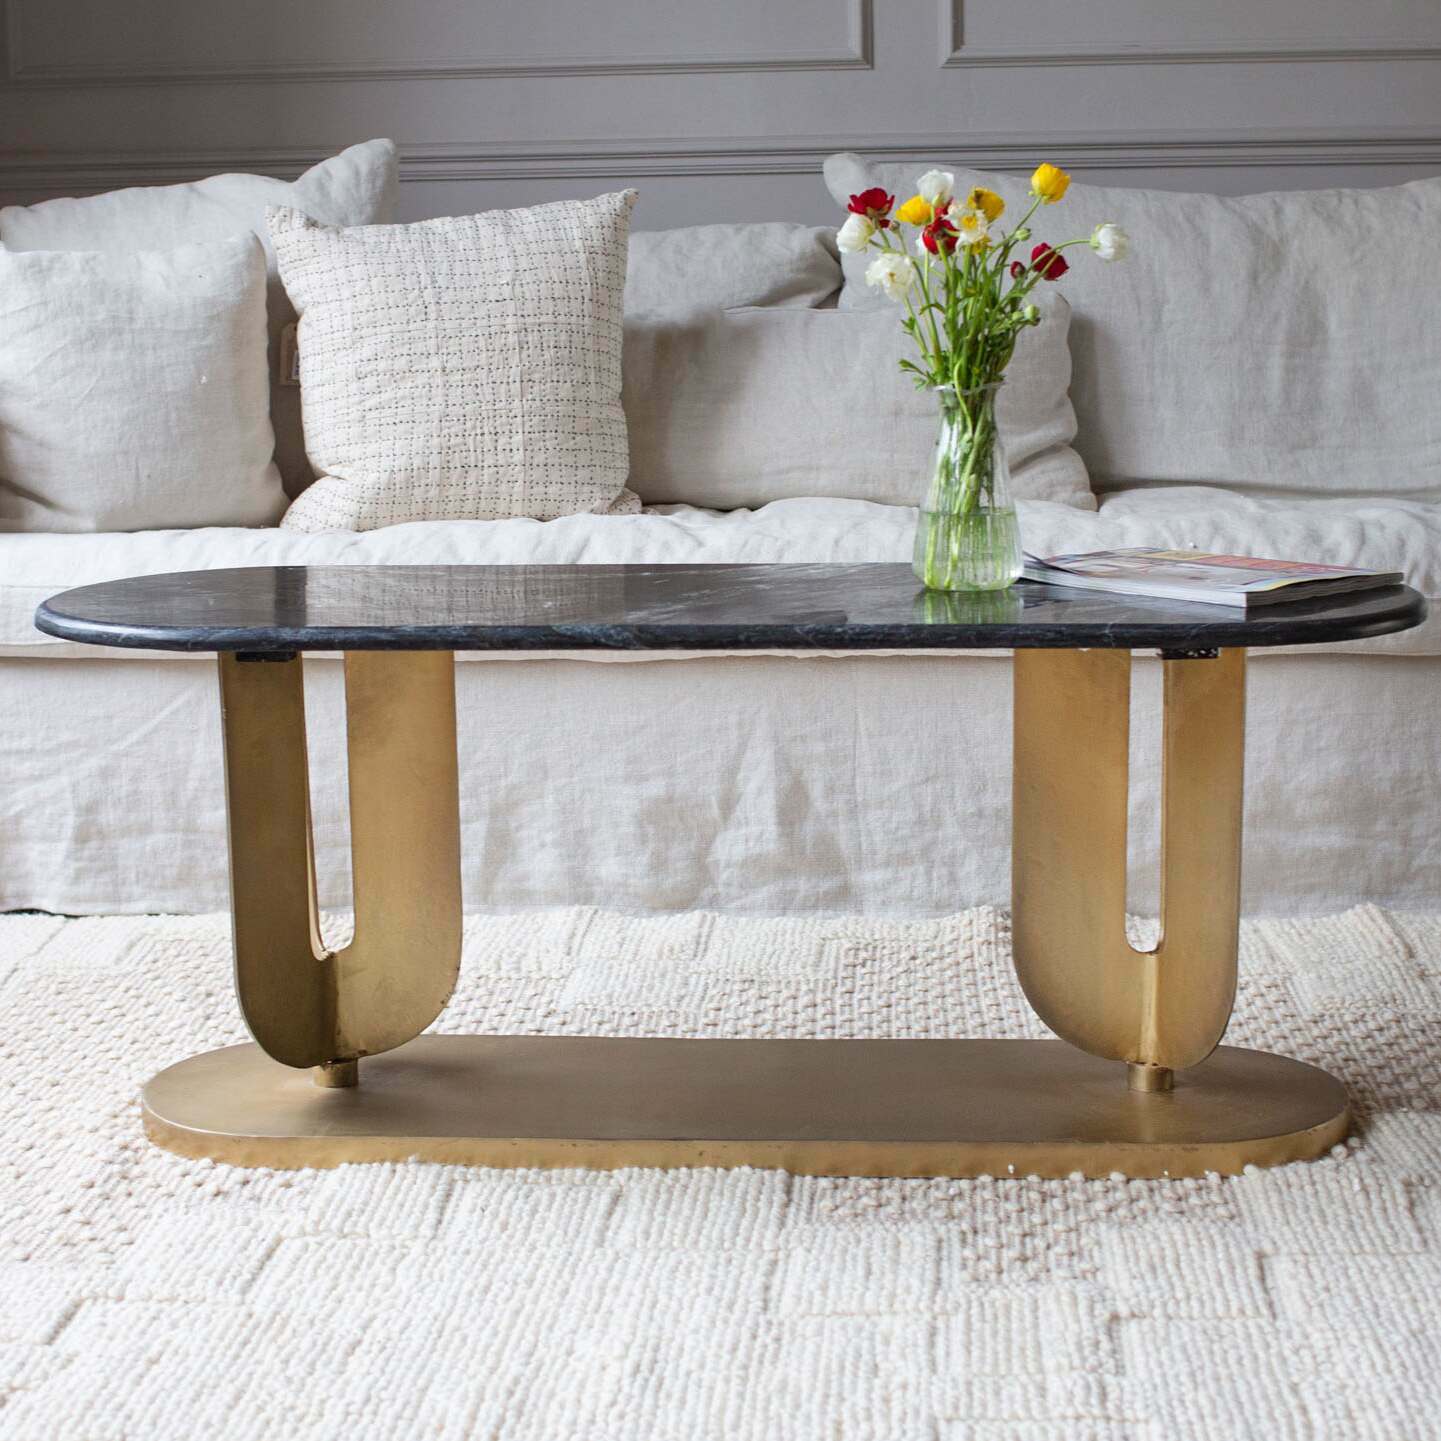 Read more about Graham and green hollywood marble coffee table